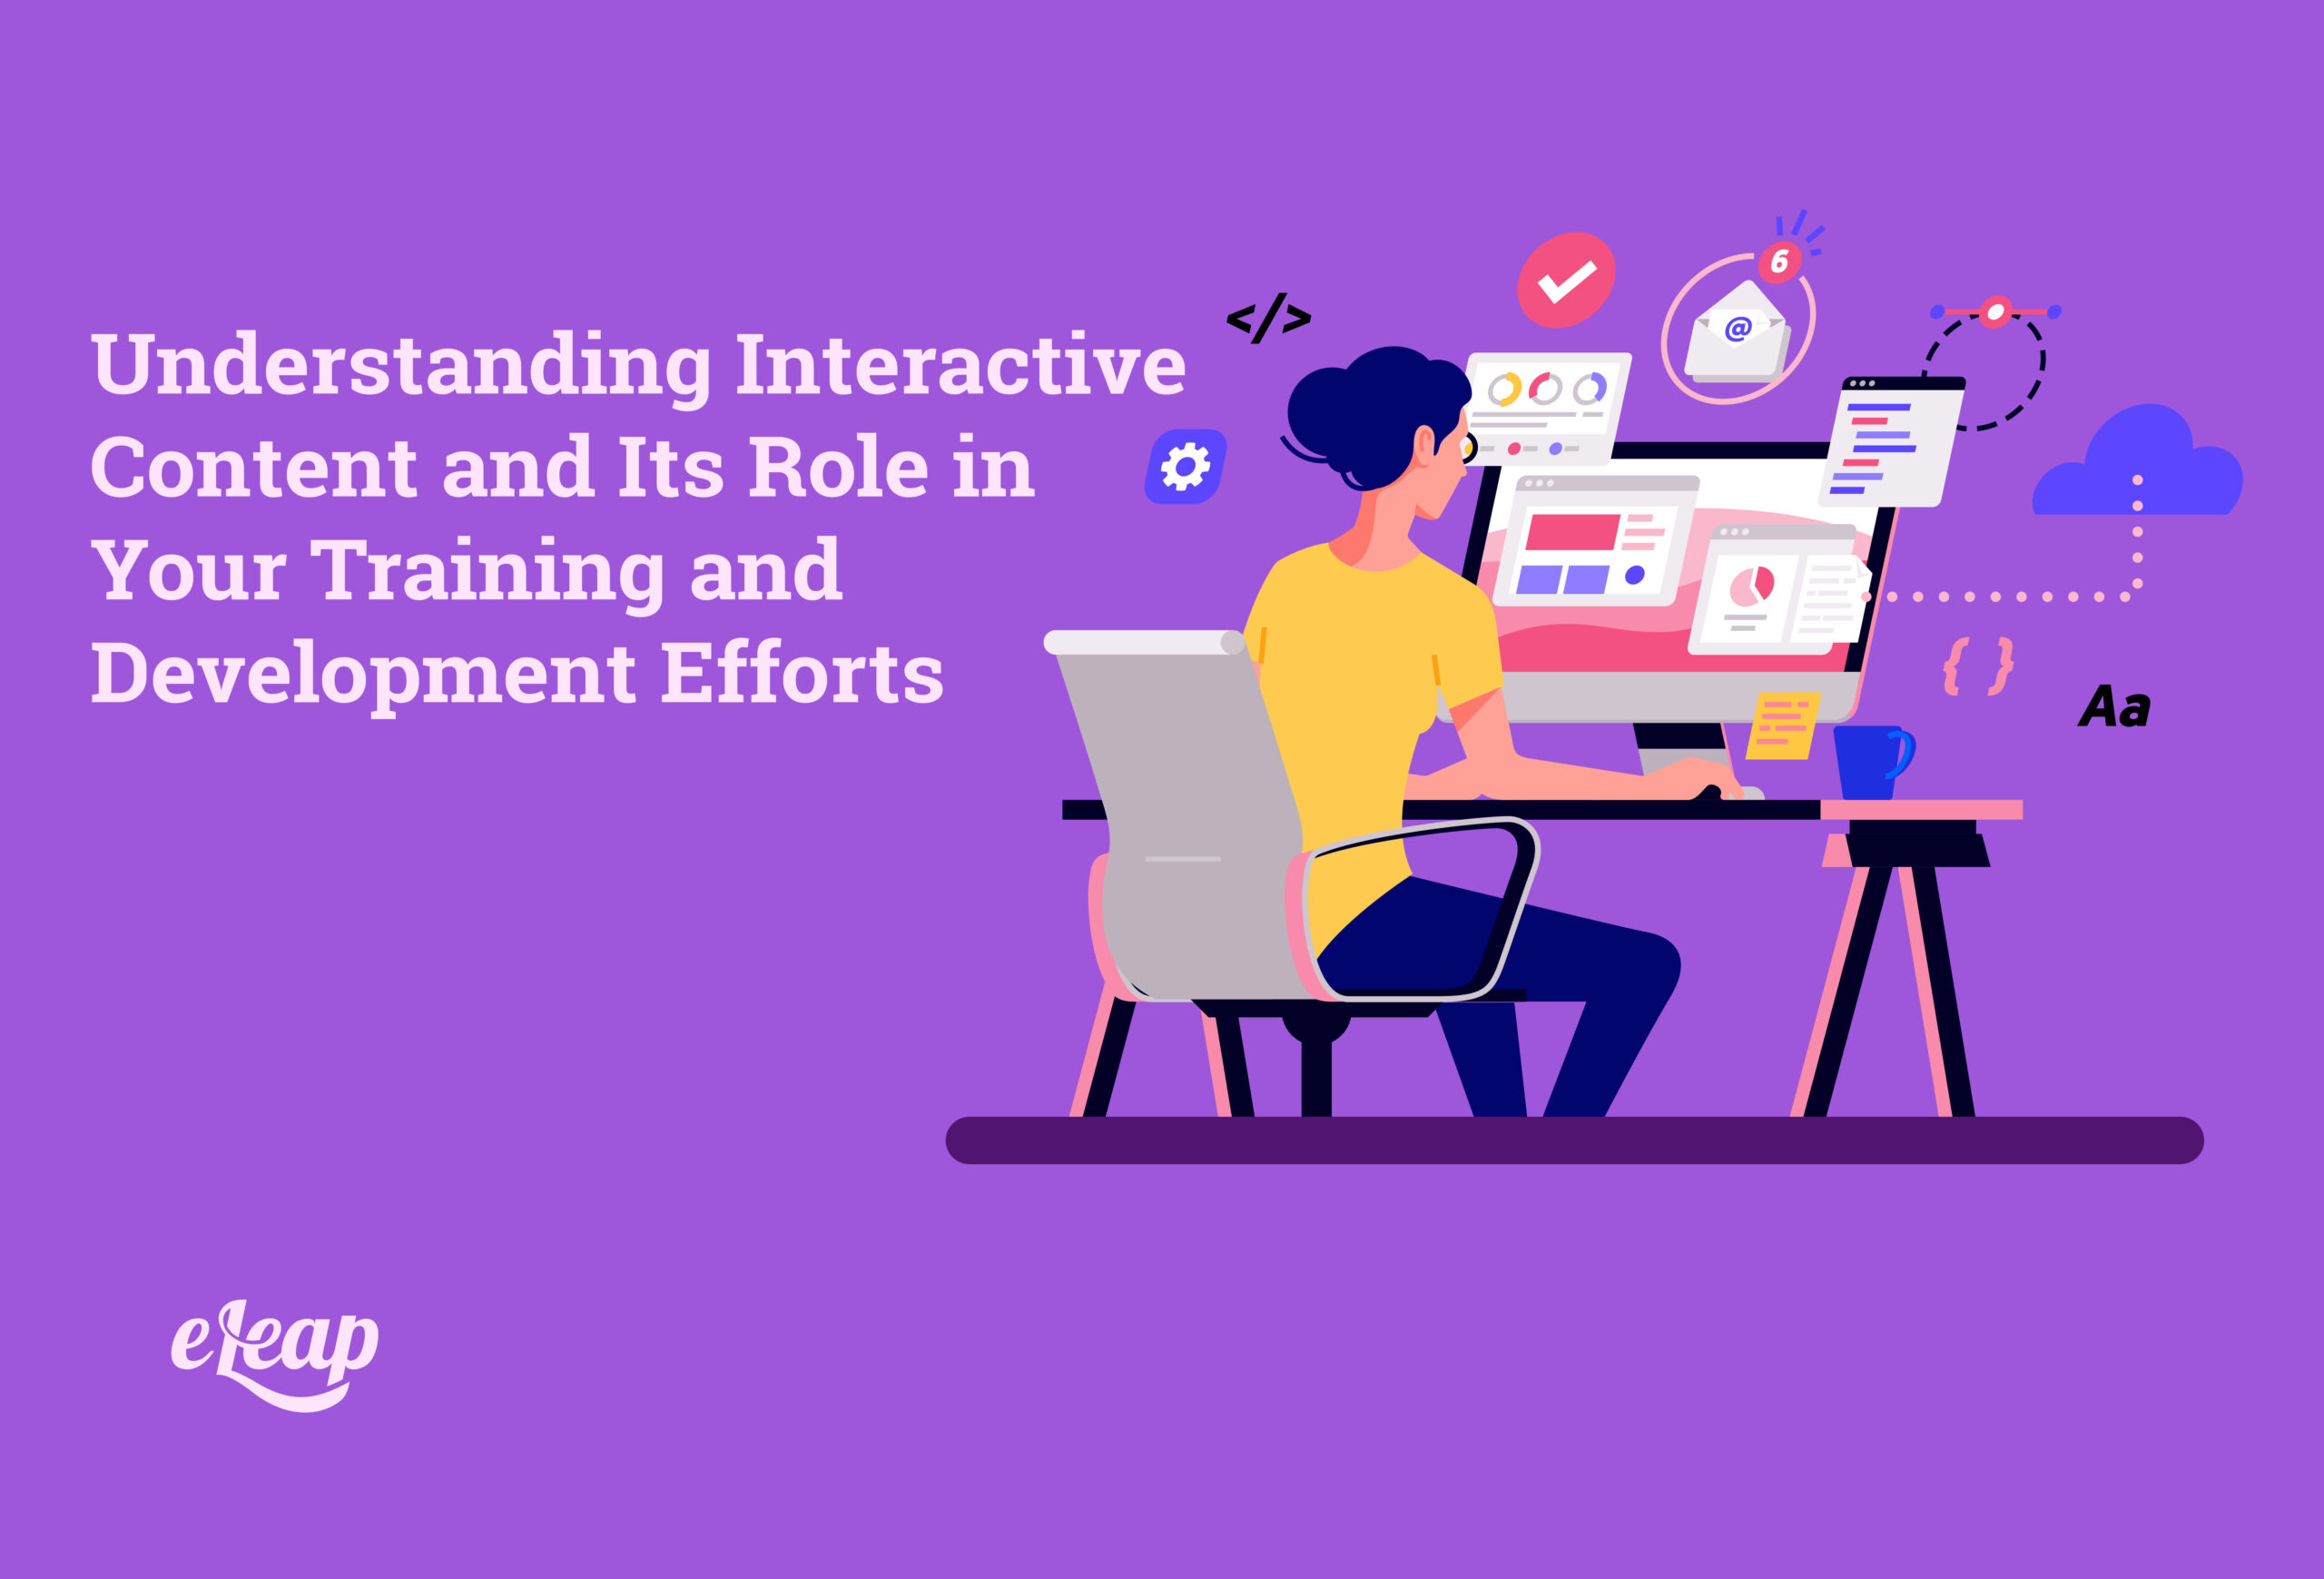 Understanding Interactive Content and Its Role in Your Training and Development Efforts